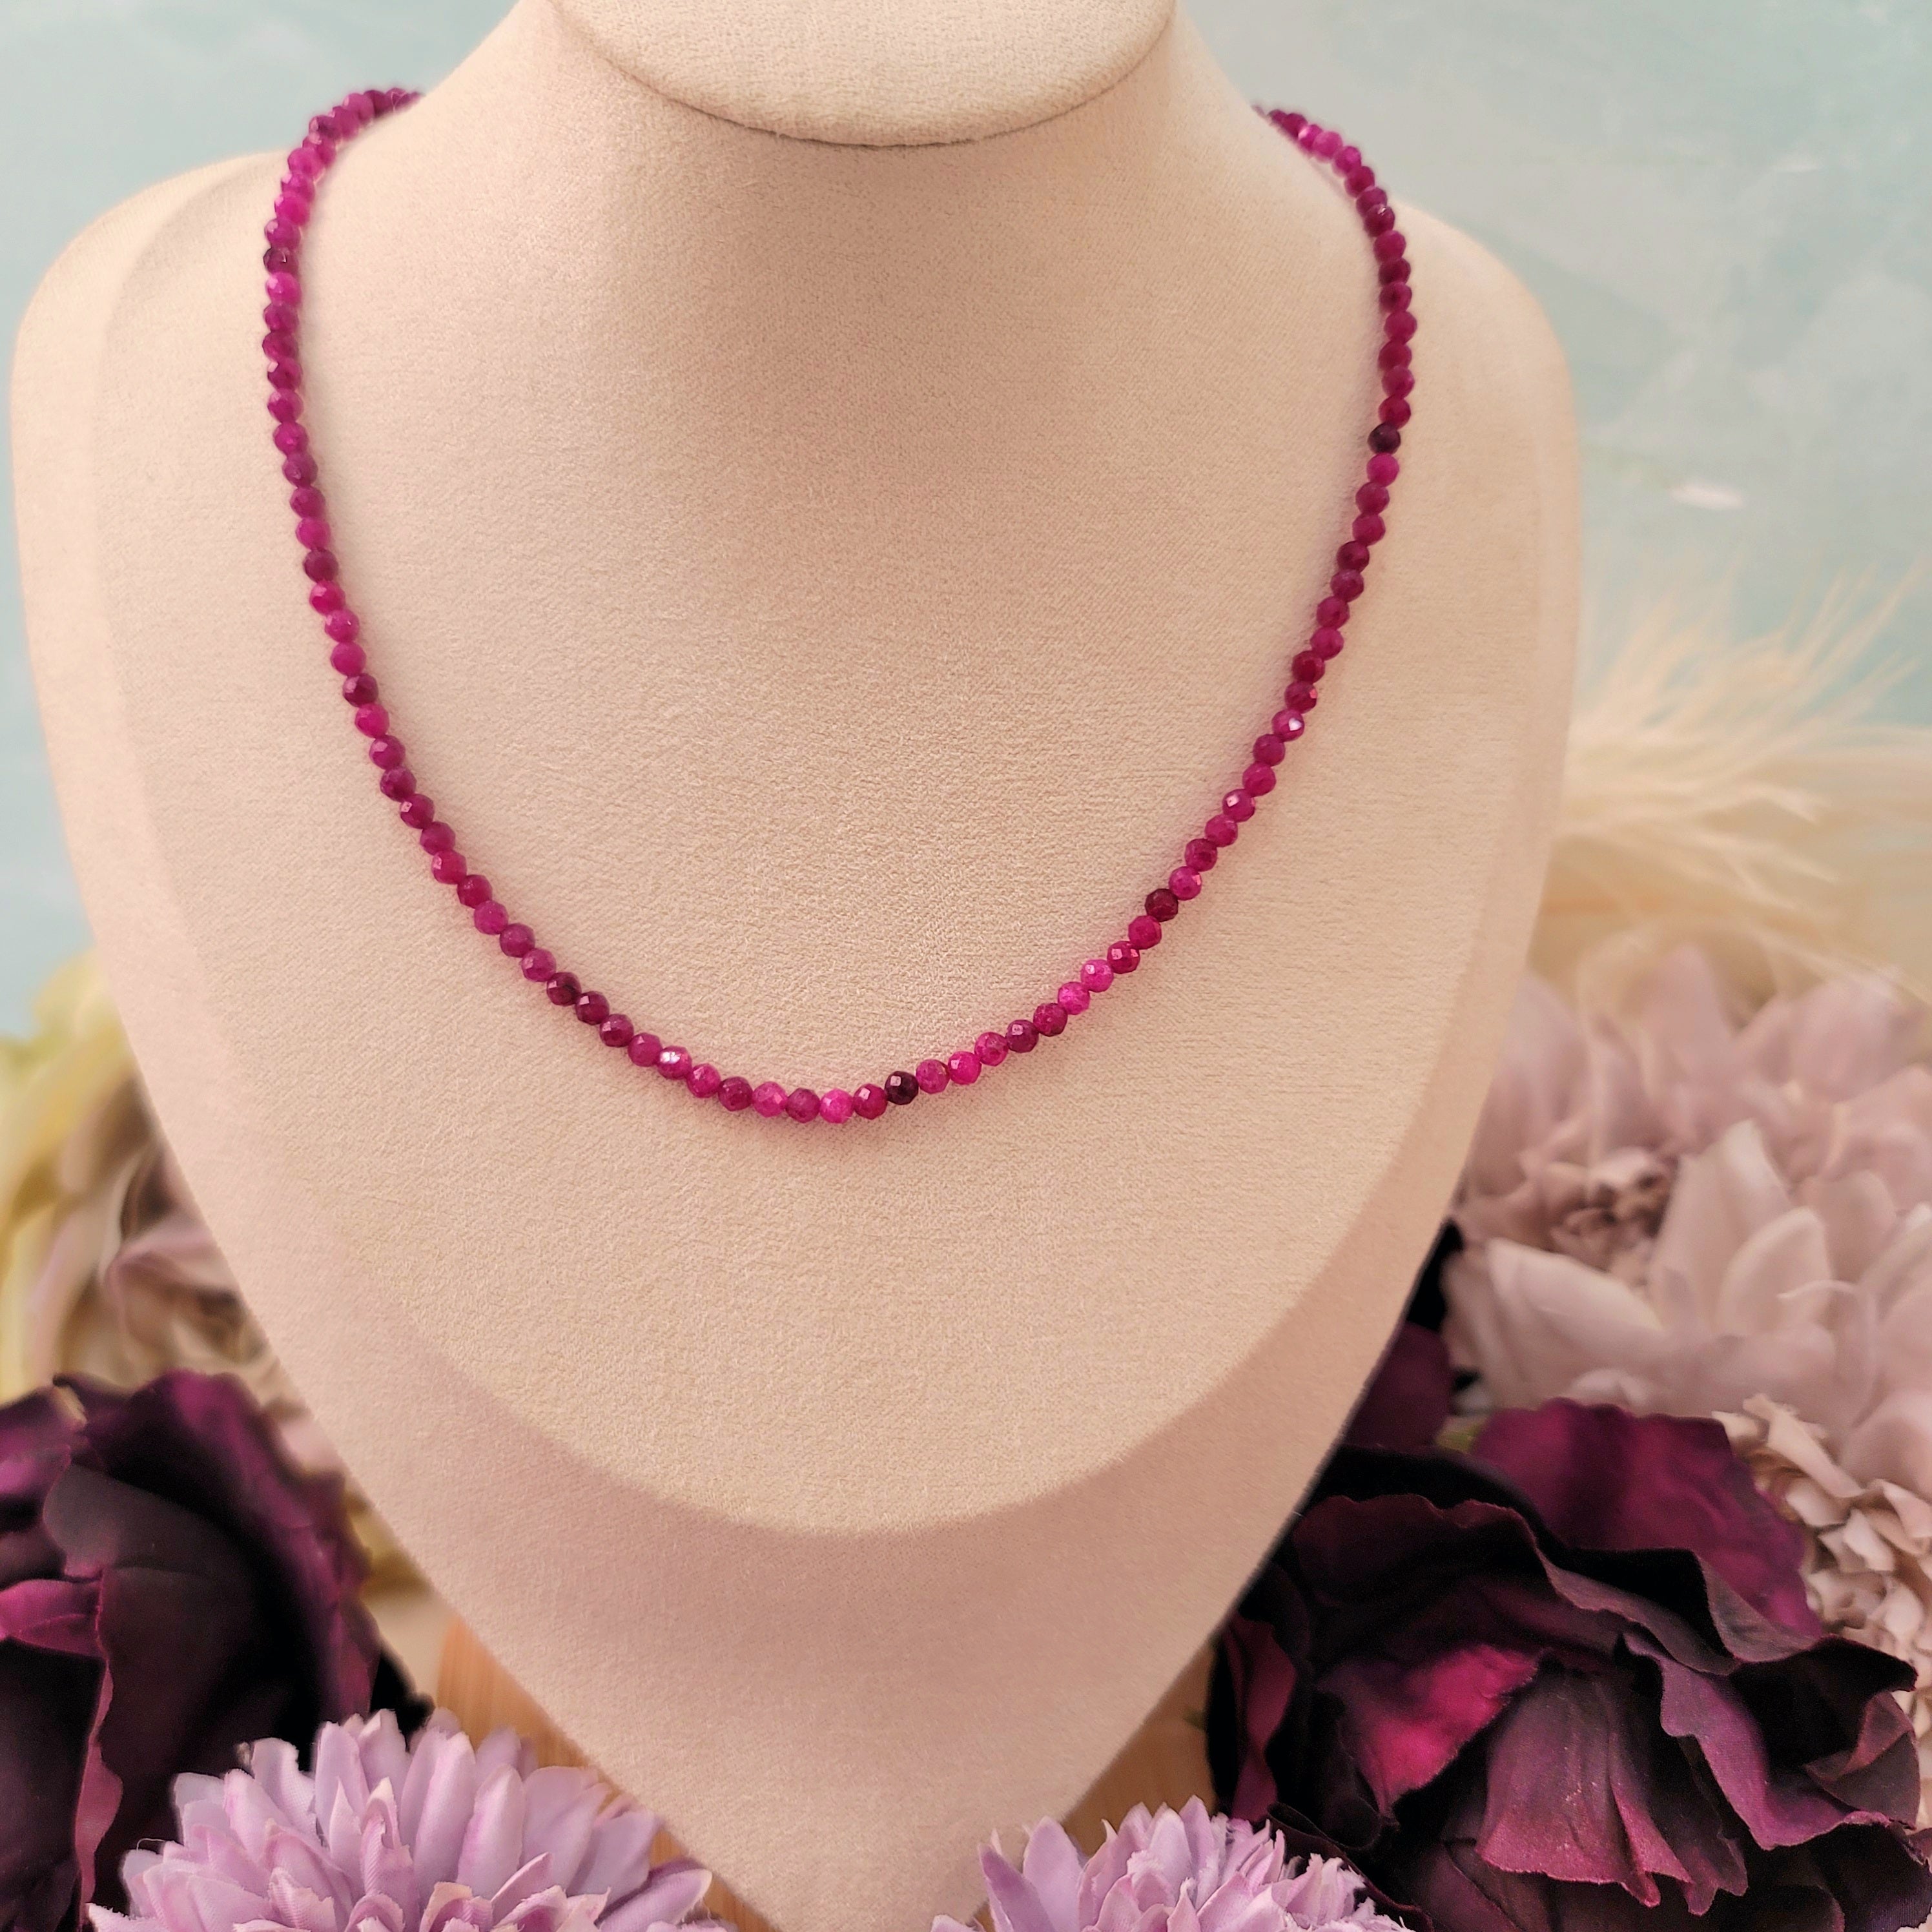 Ruby Micro Faceted Choker/Layering Necklace for Supporting Flow of Energy & Enlightenment for Root Chakra